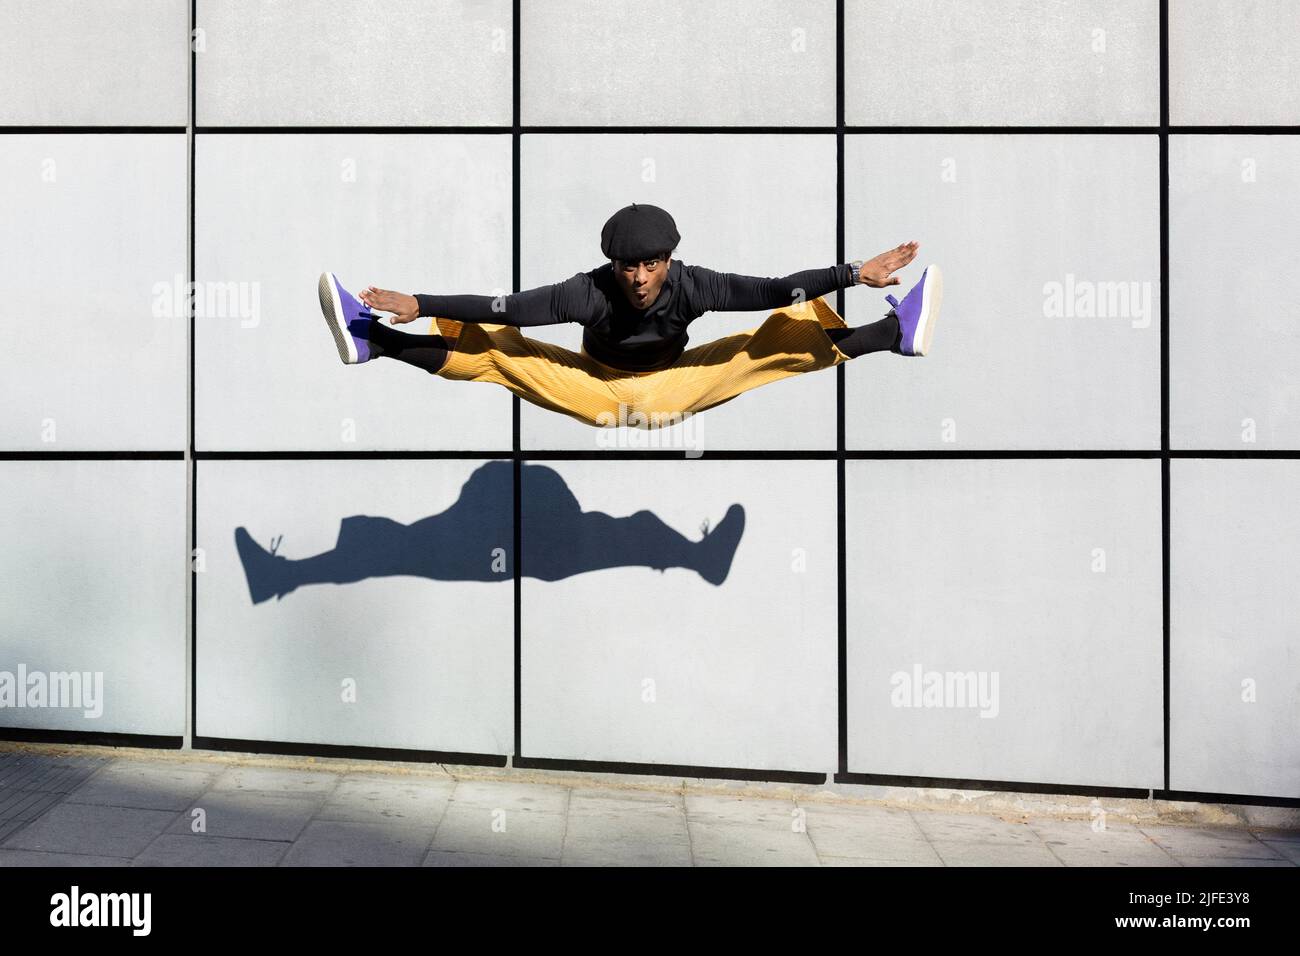 African American young adult man jumping energetically in the street. Dancer doing acrobatics in the city. Modern look, aesthetics Urban lifestyle. Sp Stock Photo